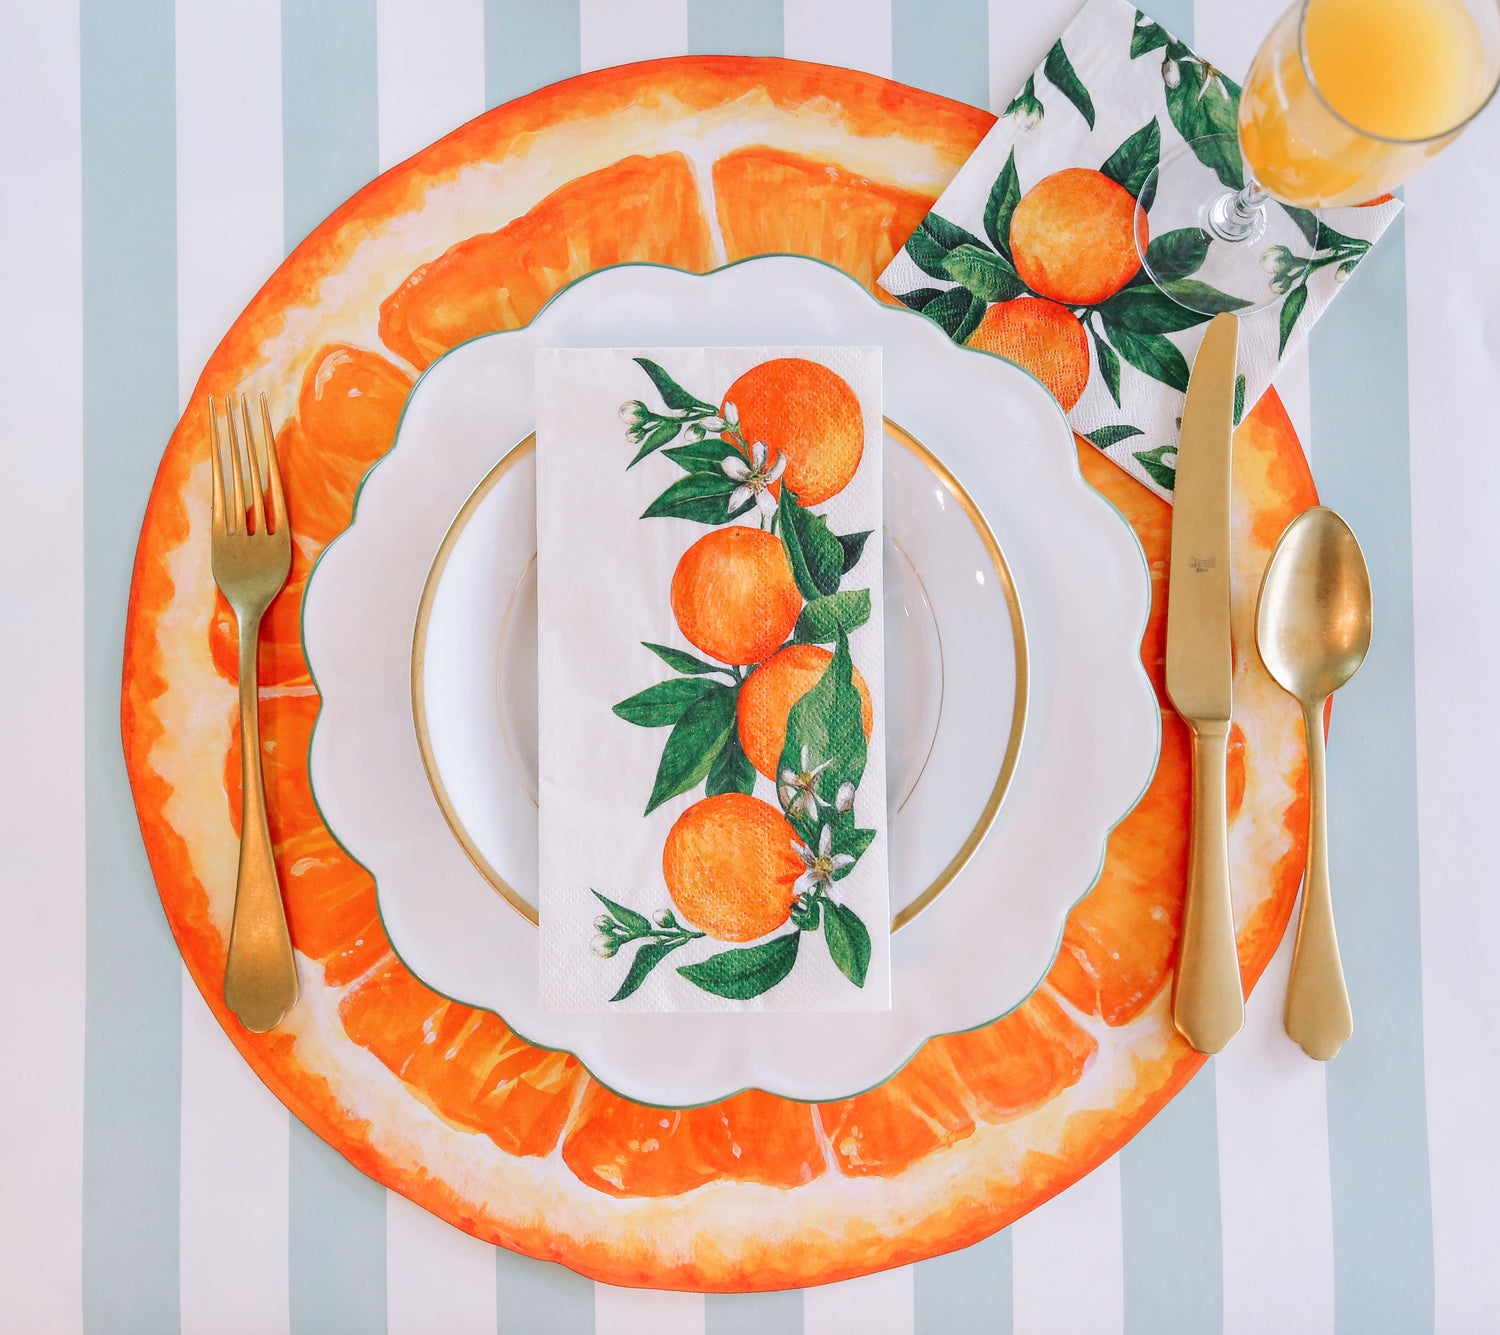 A vibrant citrus-themed place setting, featuring an Orange Orchard Guest Napkin centered on the plate, and an Orange Orchard Cocktail Napkin under a glass of orange juice, from above.